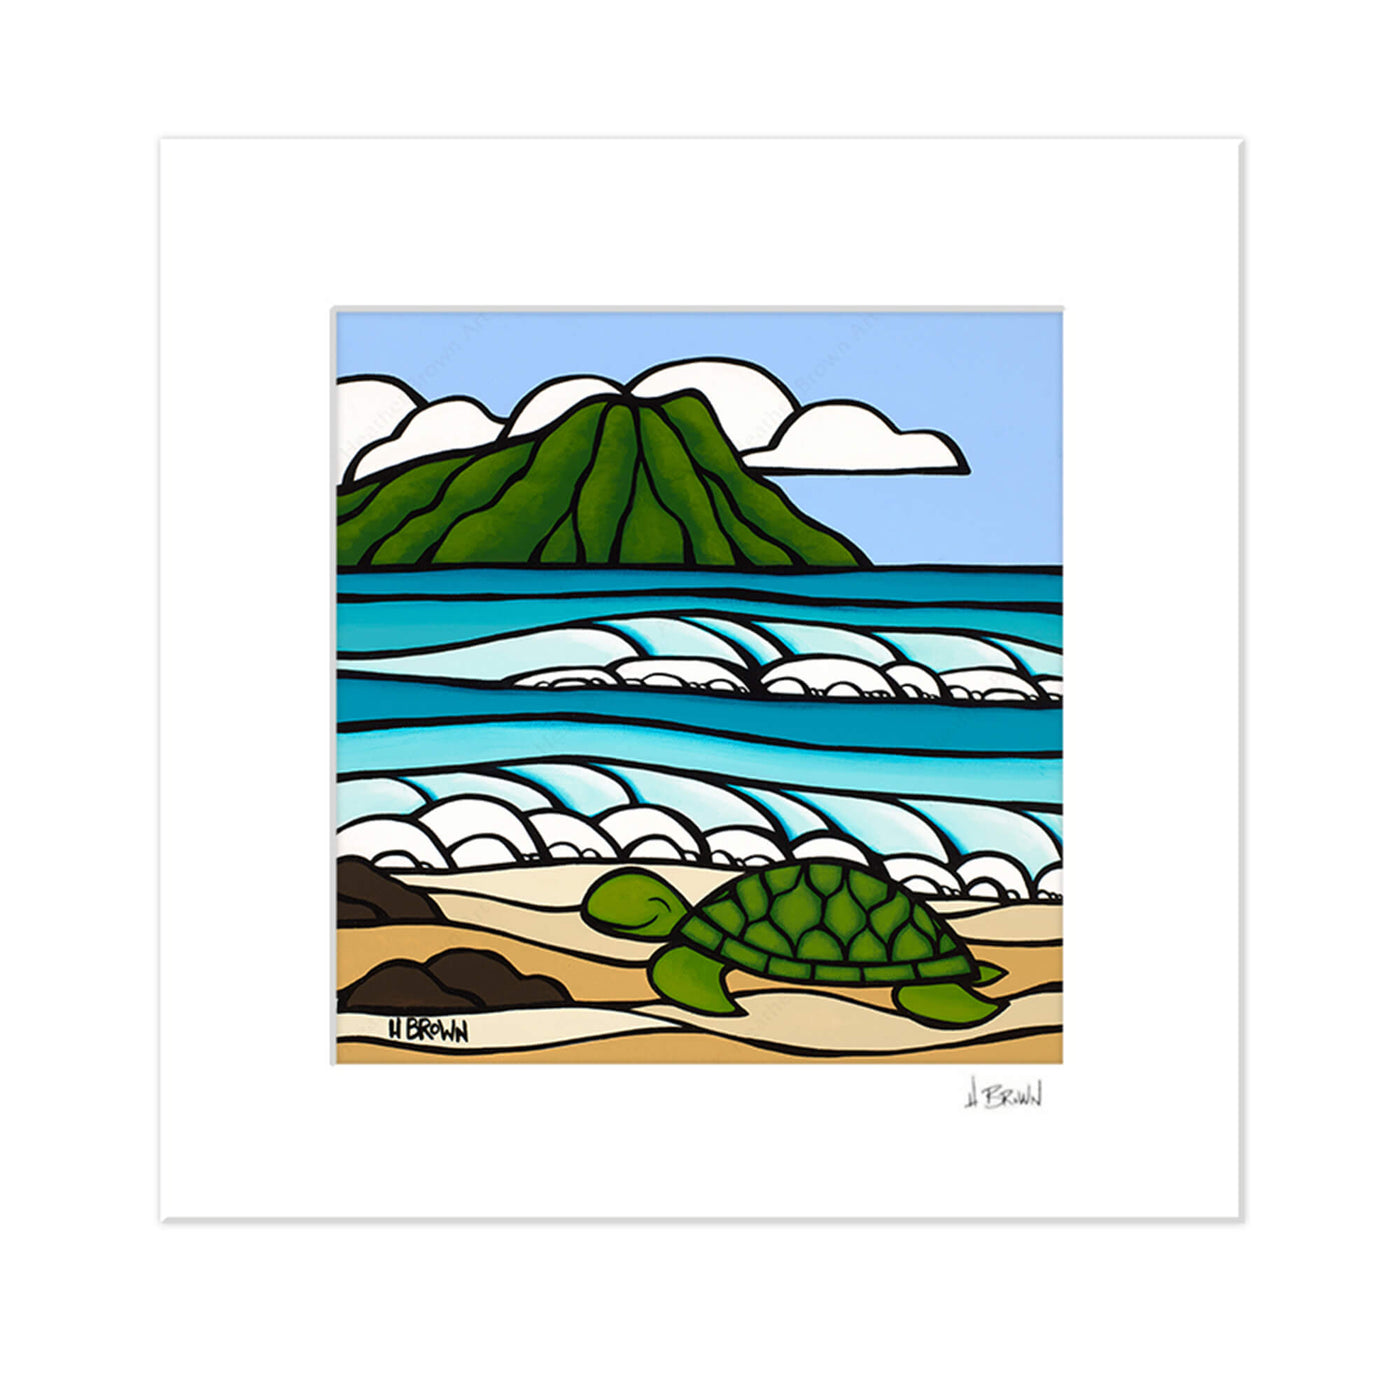 Unframed matted art print featuring a smiling turtle with some rolling waves and the famous Diamond Head by Hawaii surf artist Heather brown